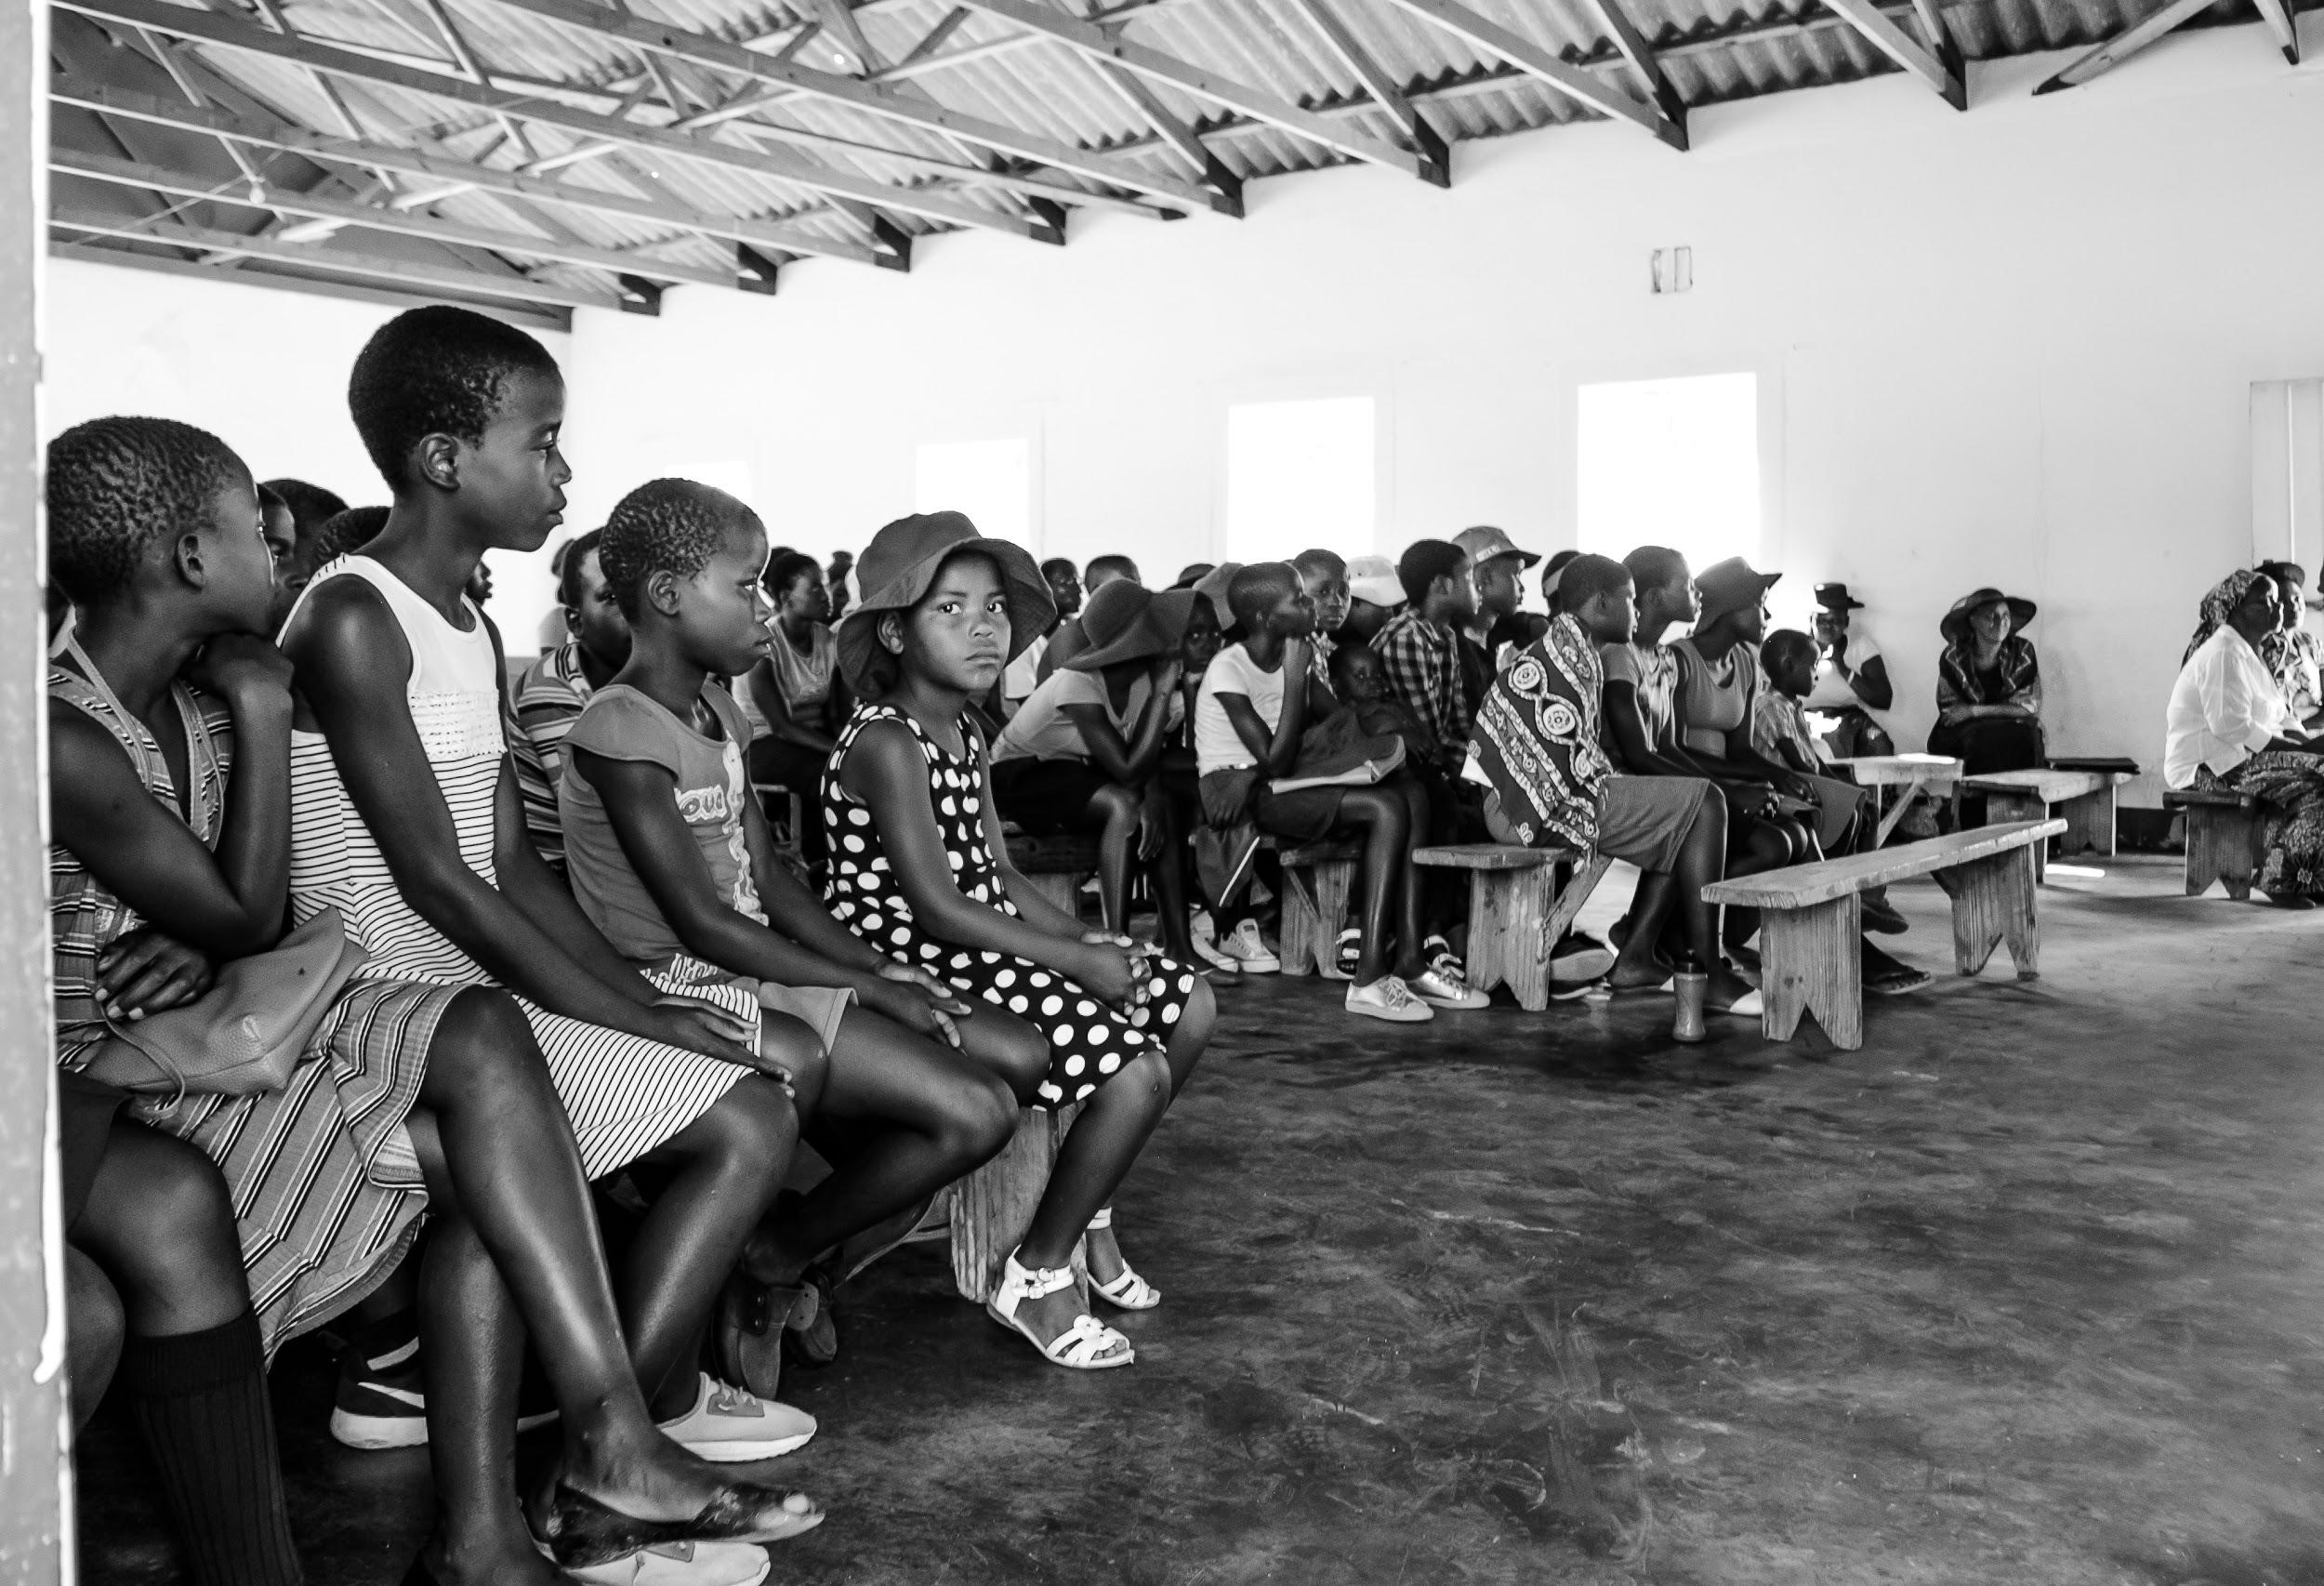 A large group of African children in a large building; one child is looking at the camera.